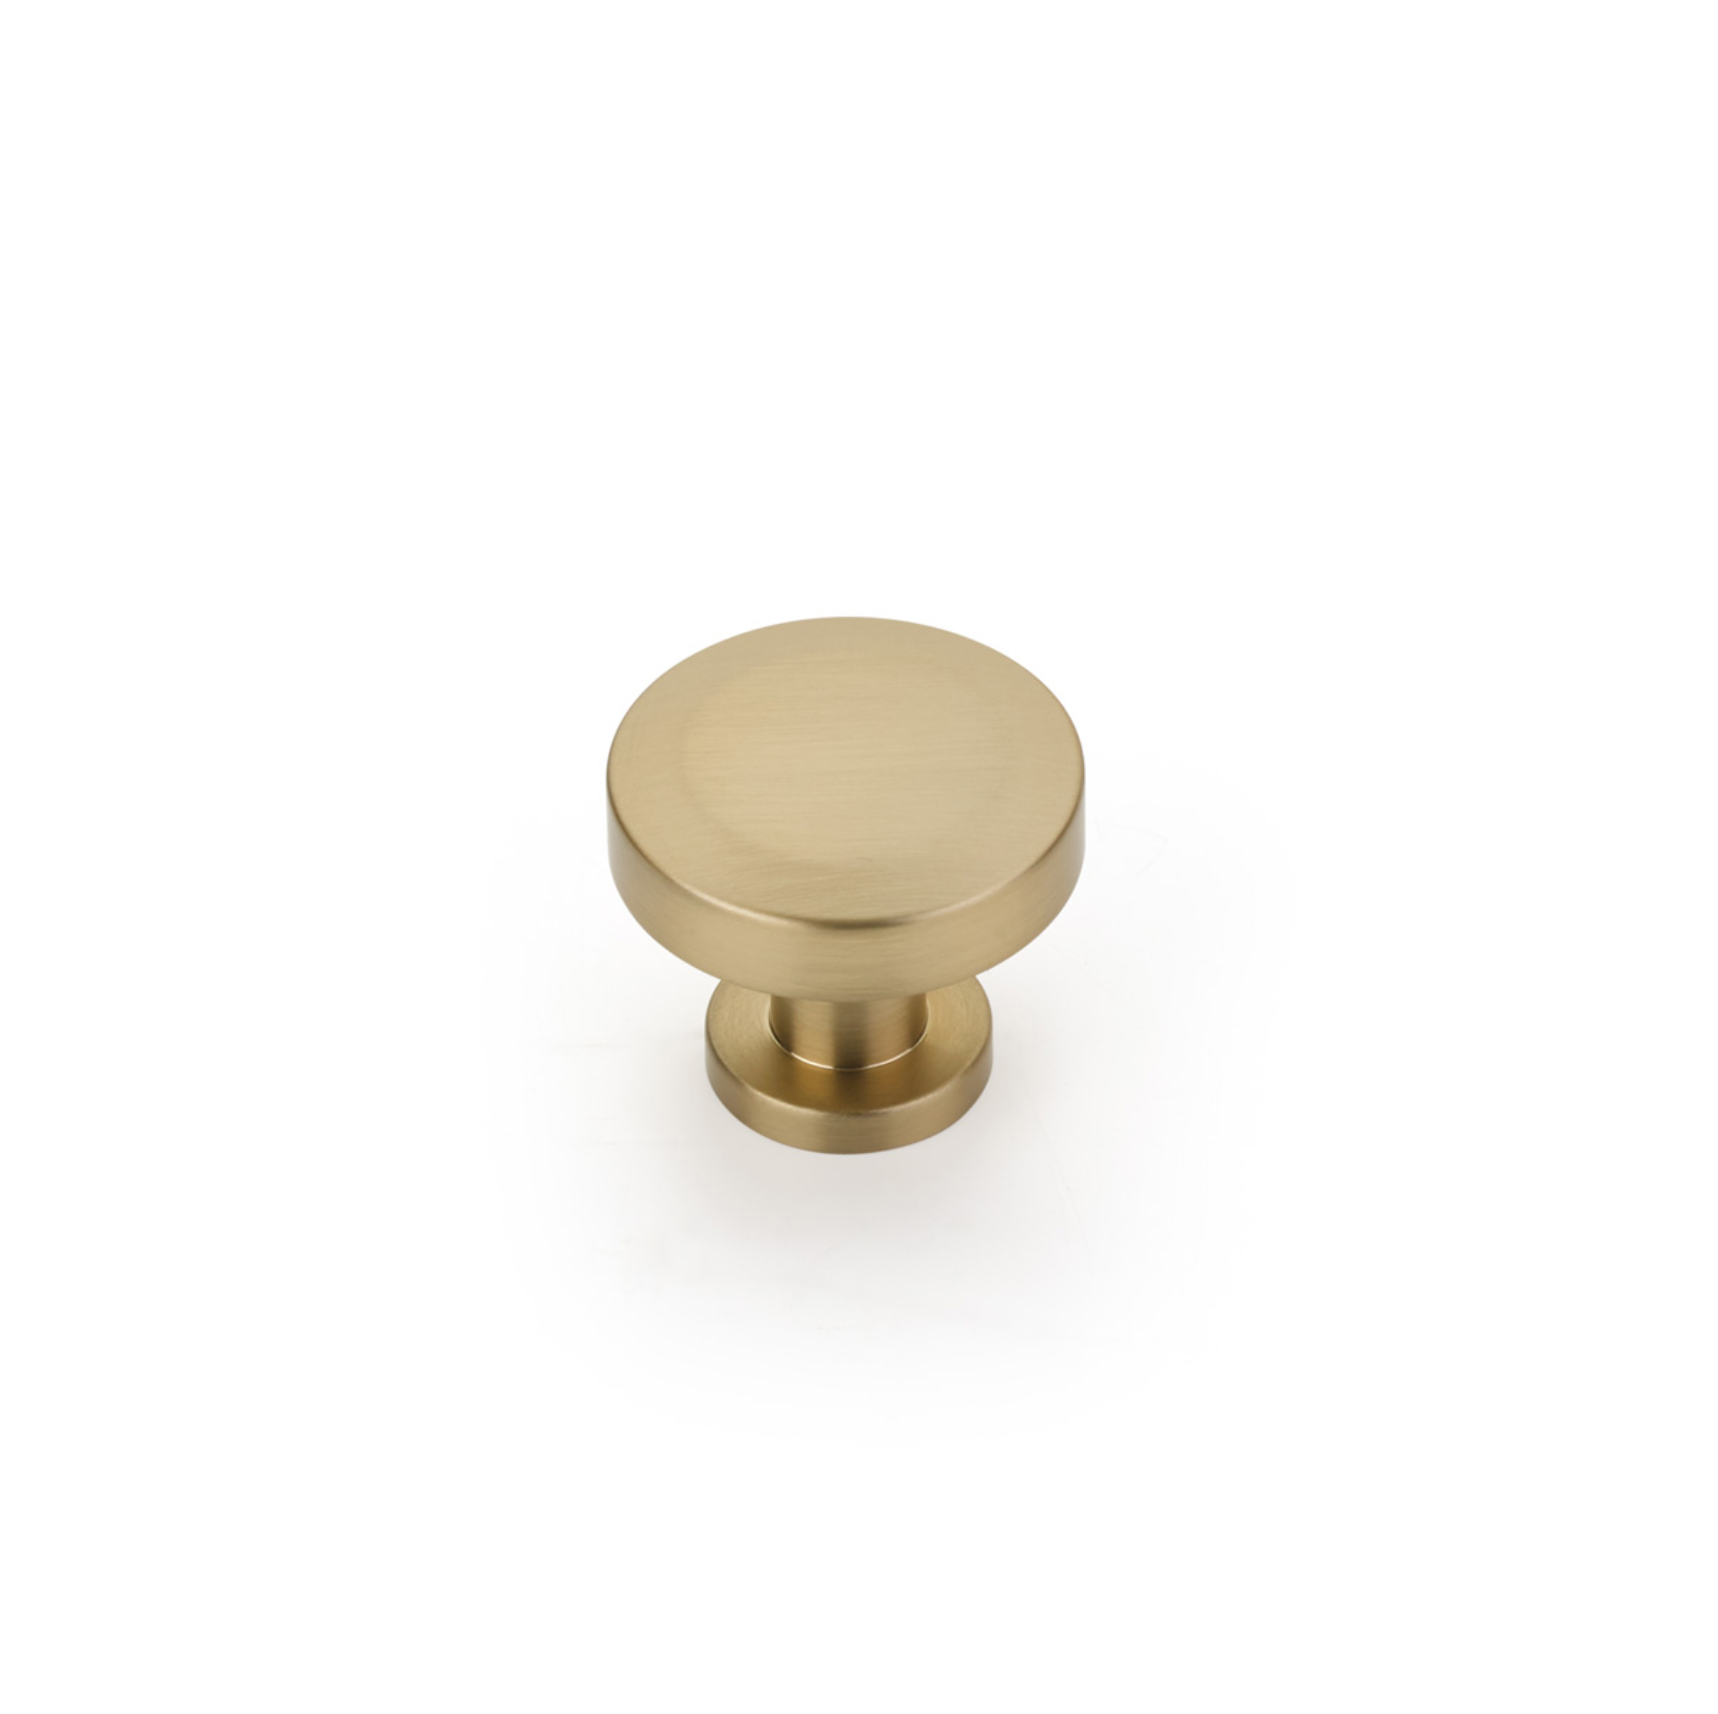 Champagne Bronze "Heather" T-Bar Cabinet Knobs and Drawer Pulls